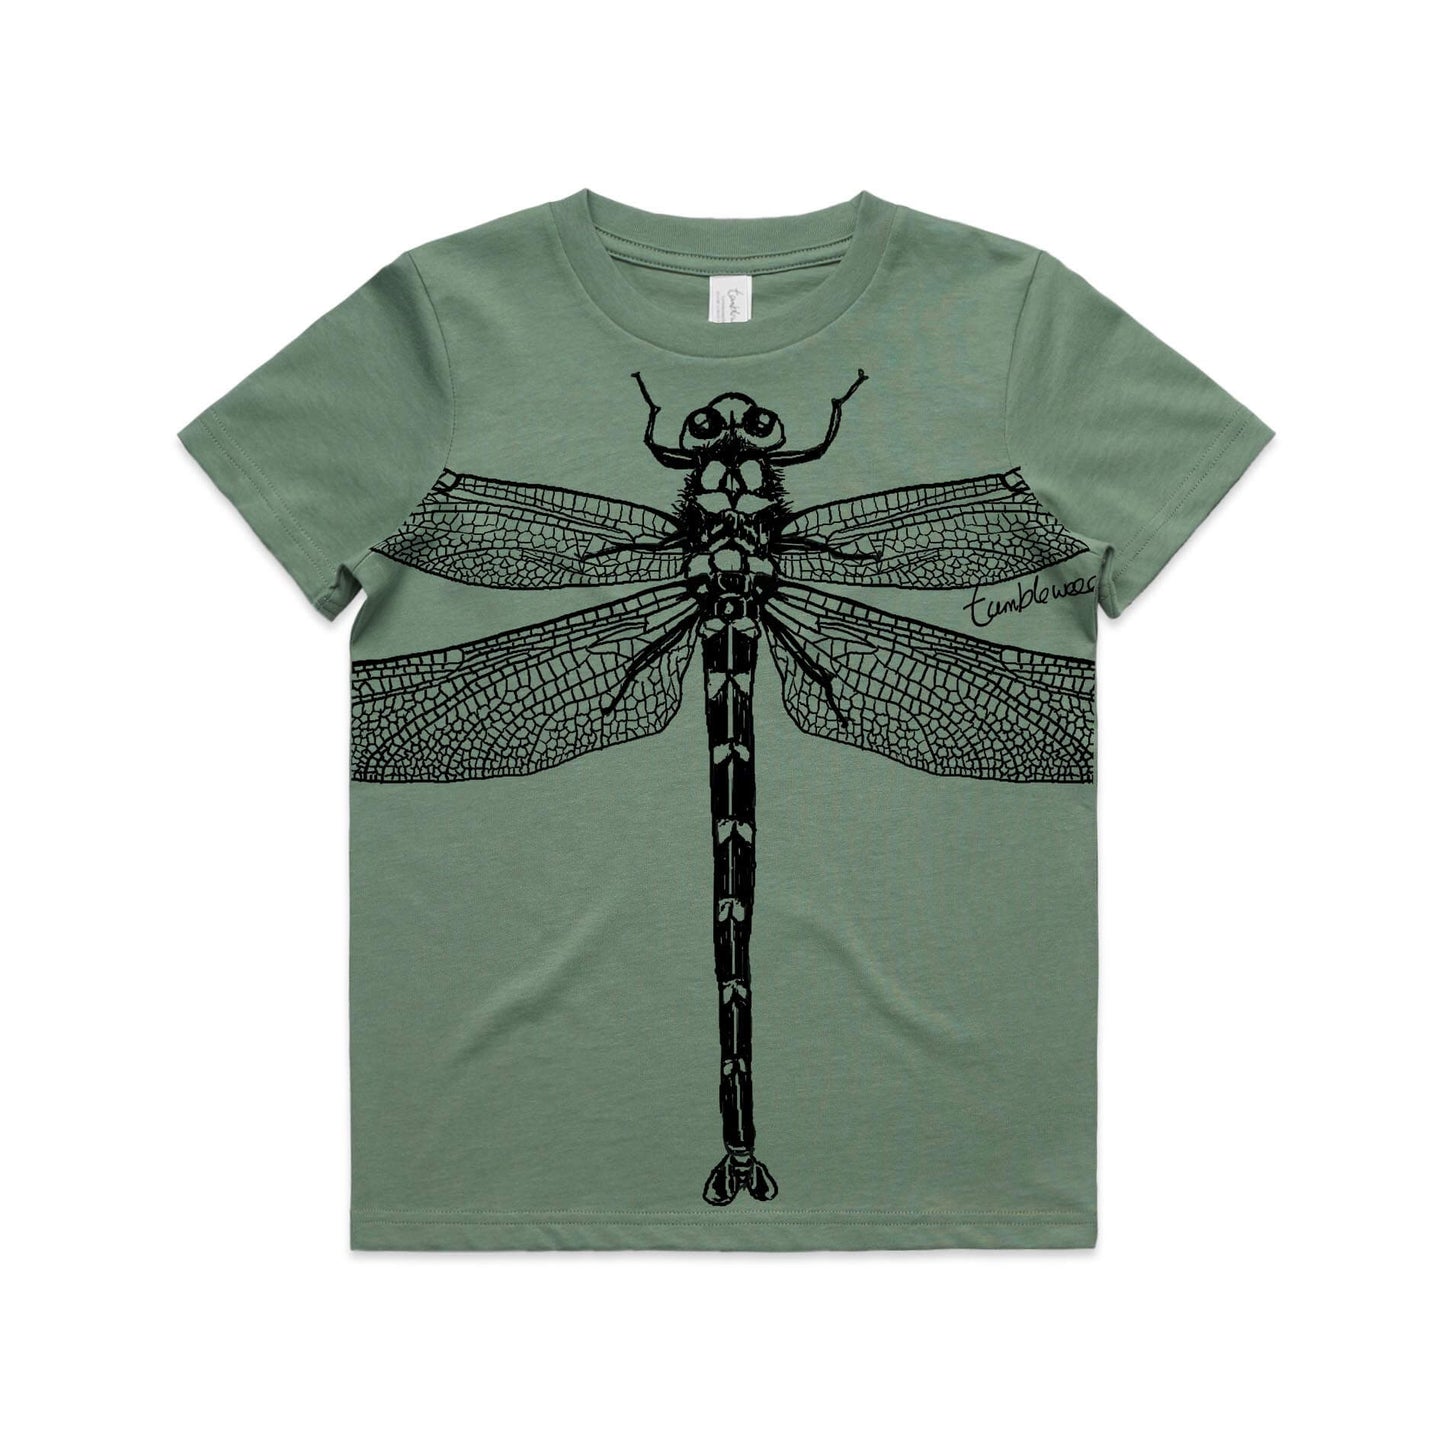 Sage, cotton kids' t-shirt with screen printed Kids dragonfly design.